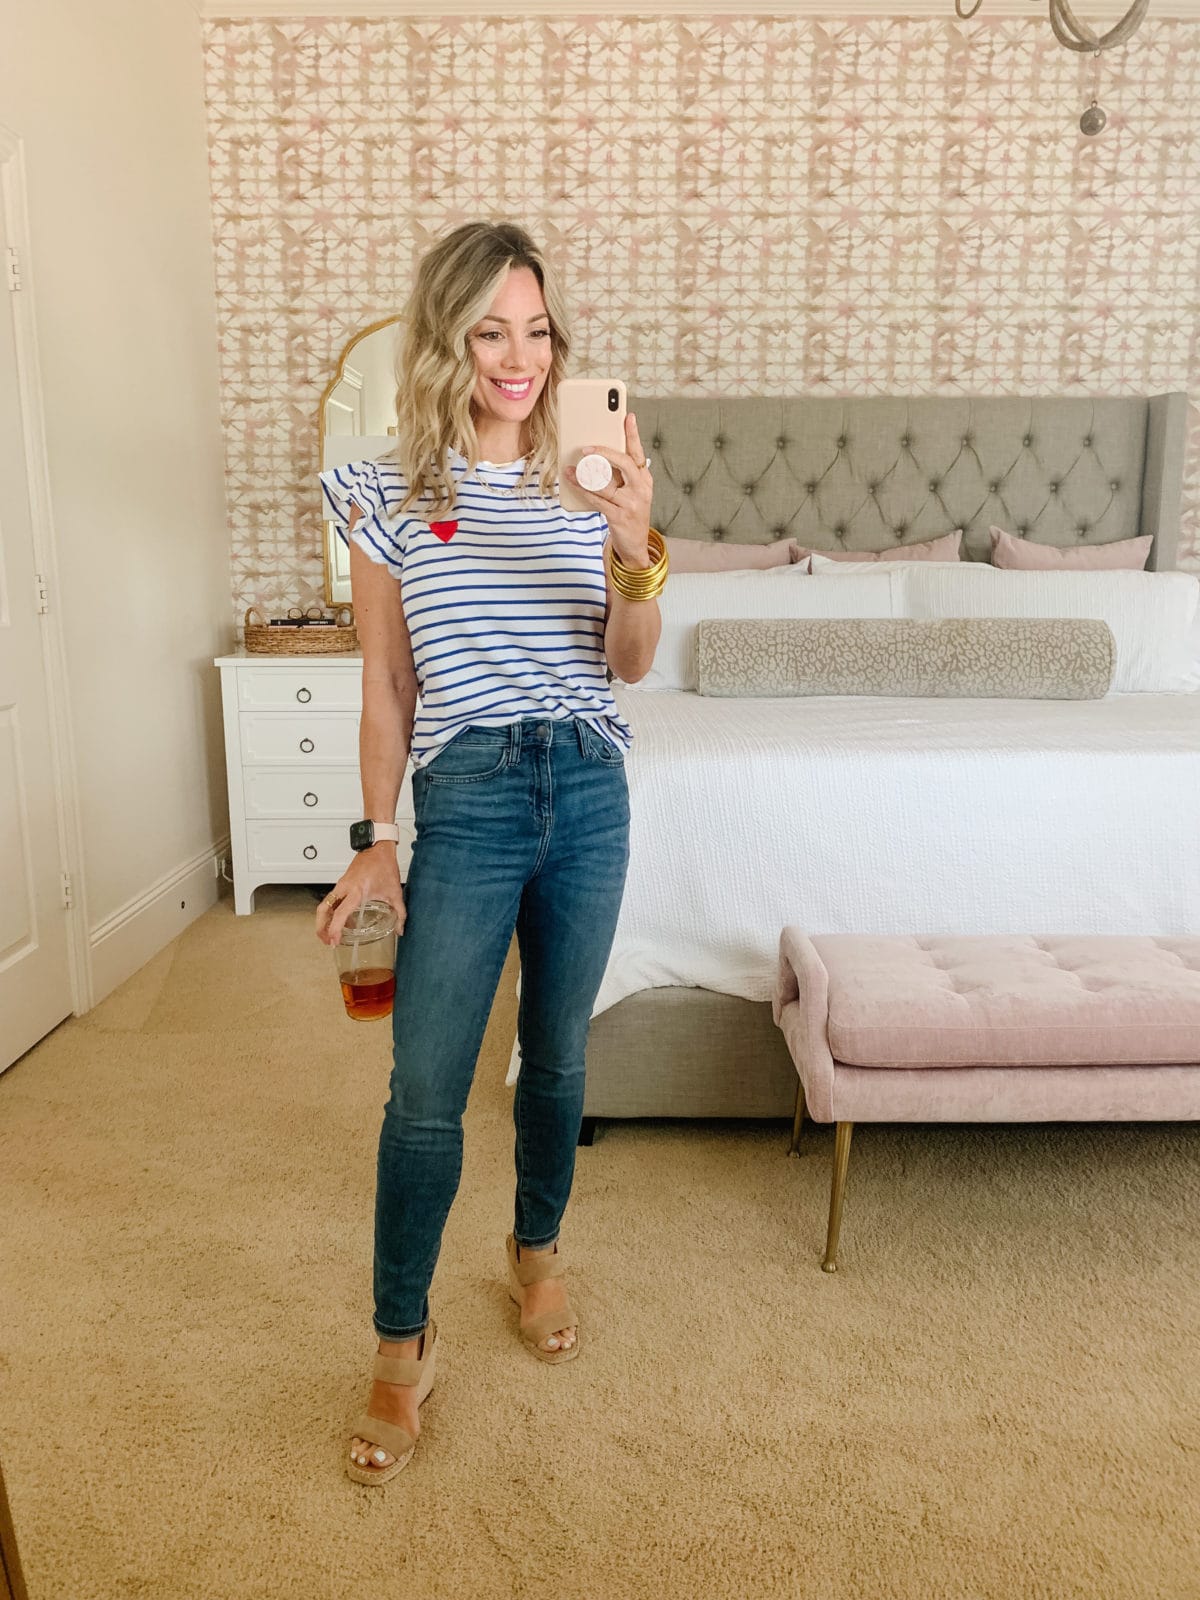 Amazon Fashion Faves, Stripe Tee and Jeans with Wedges 